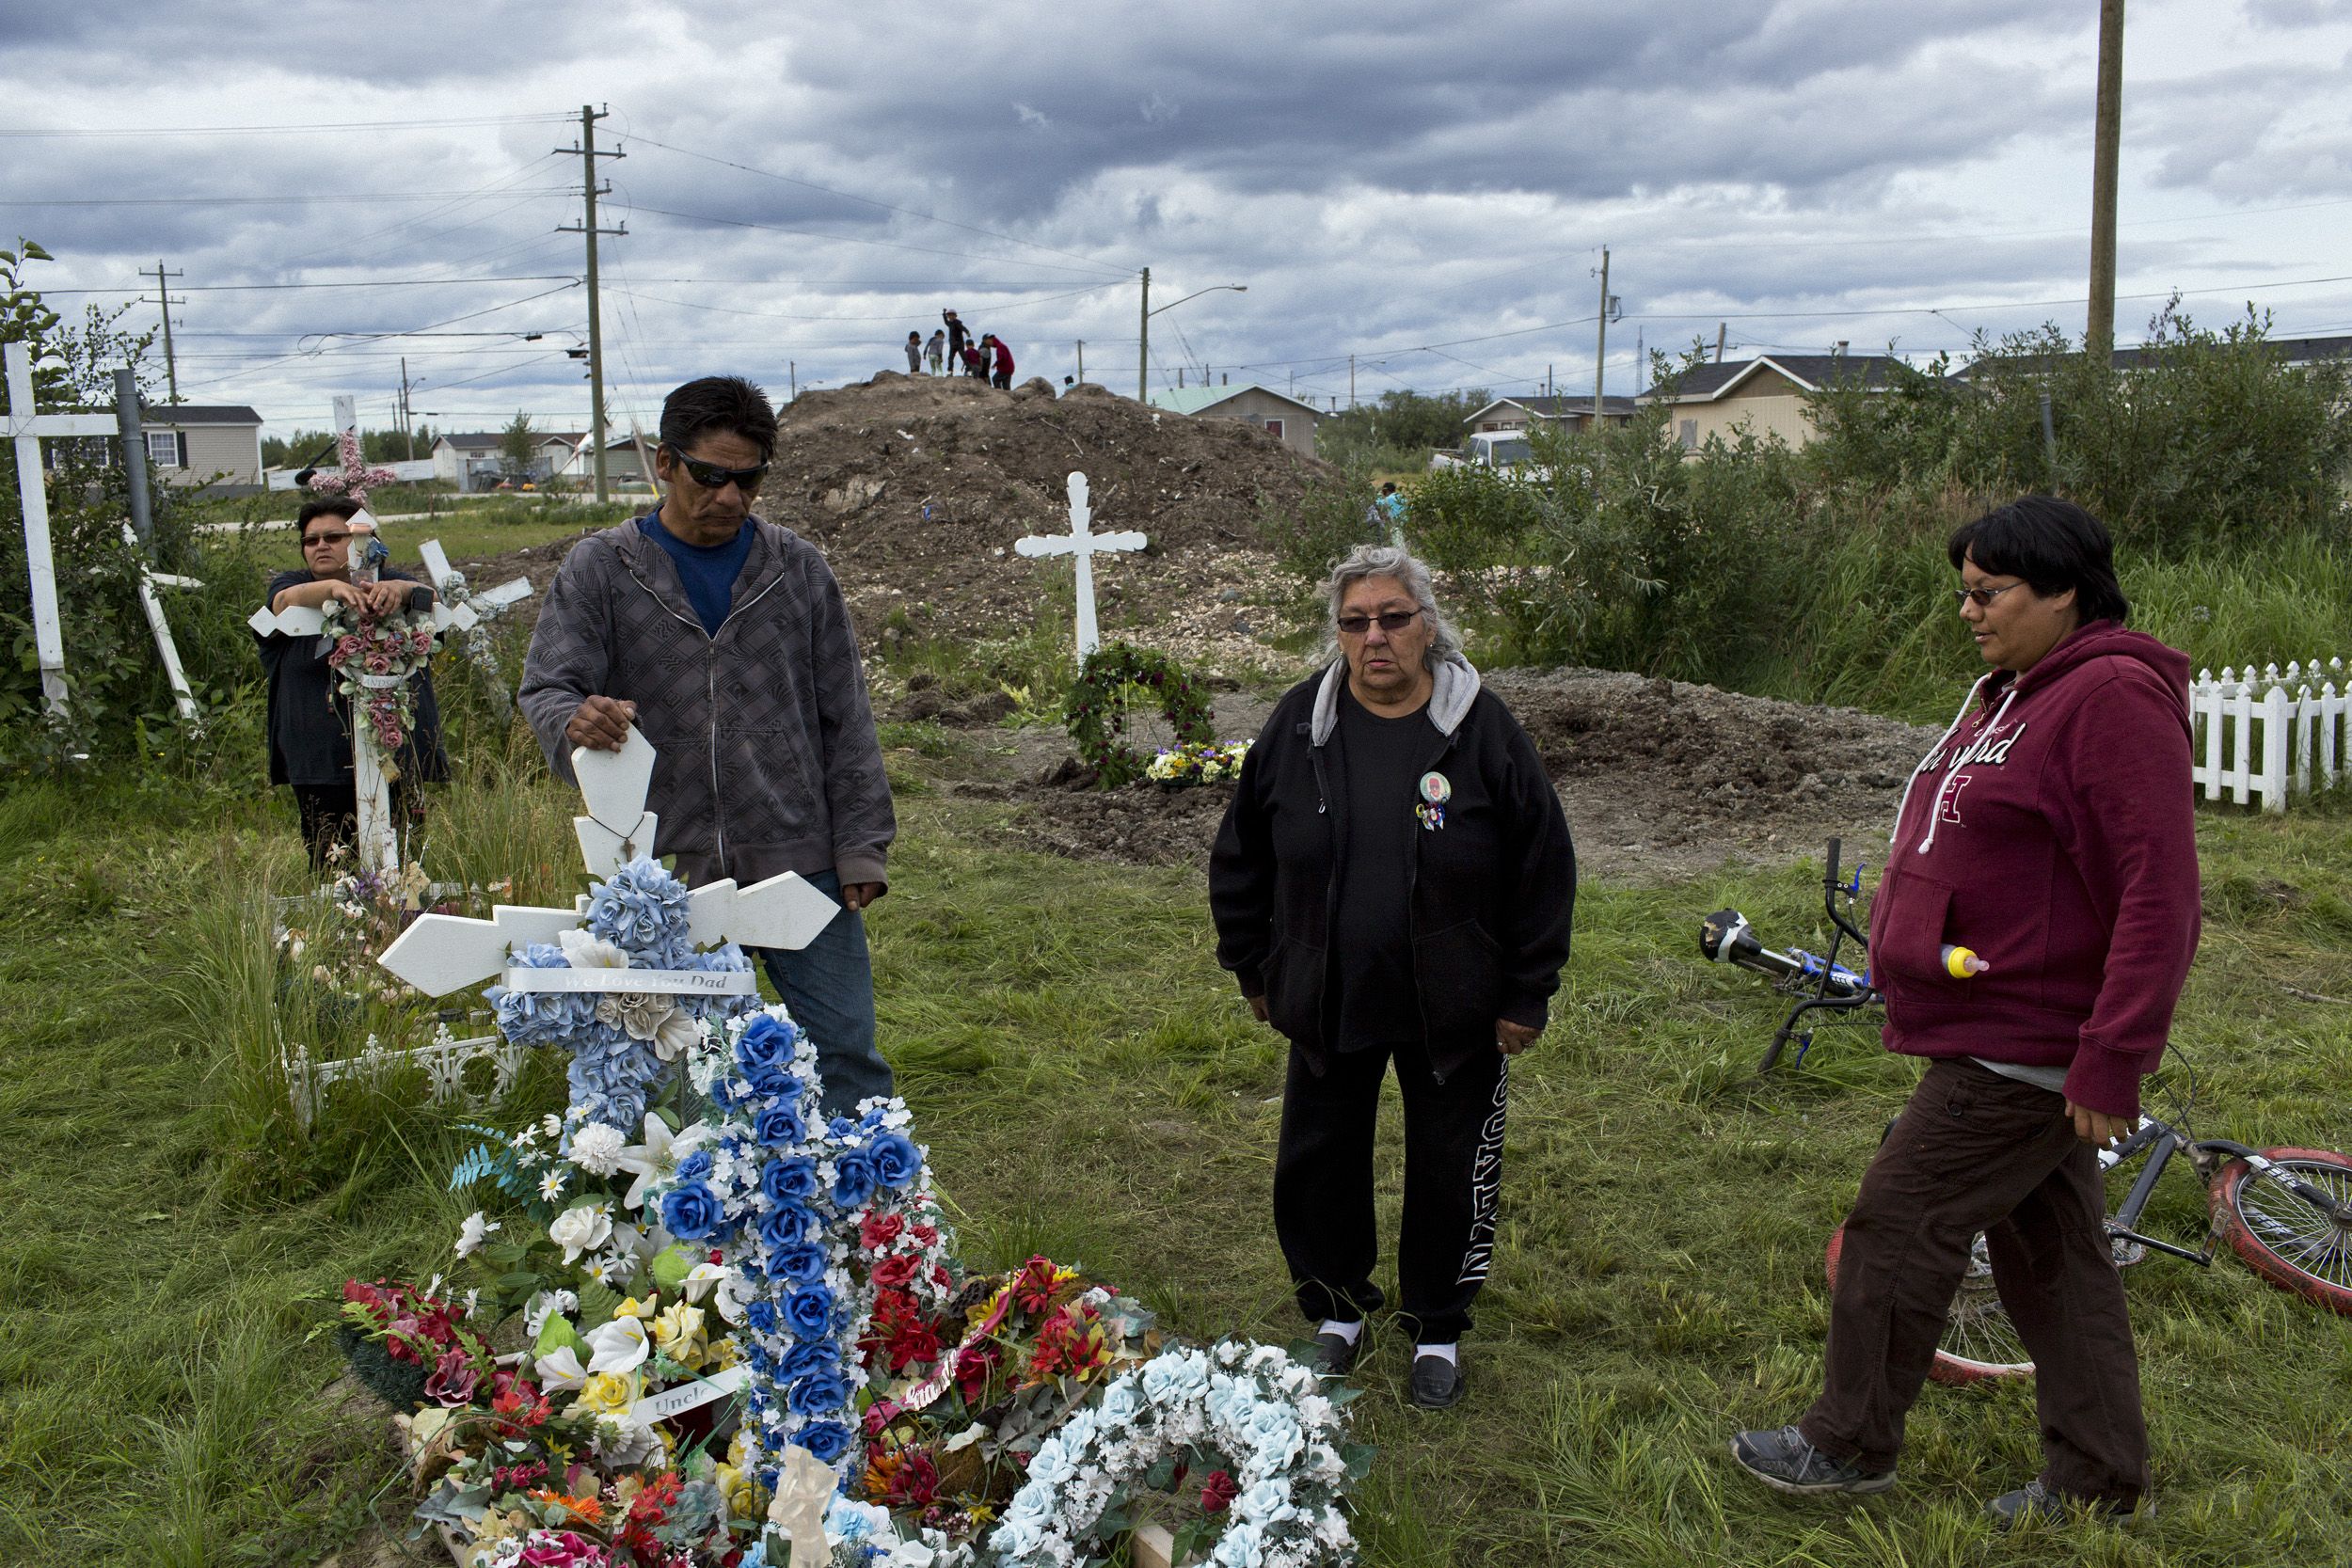 Members of the Attawapiskat First Nation community gather in the St. Mary’s cemetery to visit the graves of loved ones. Despite the loss, there was a sense of connection and strength from the families, a testament to the resilience of the Cree people. Image by David Maurice Smith/Oculi. Canada, 2016.
